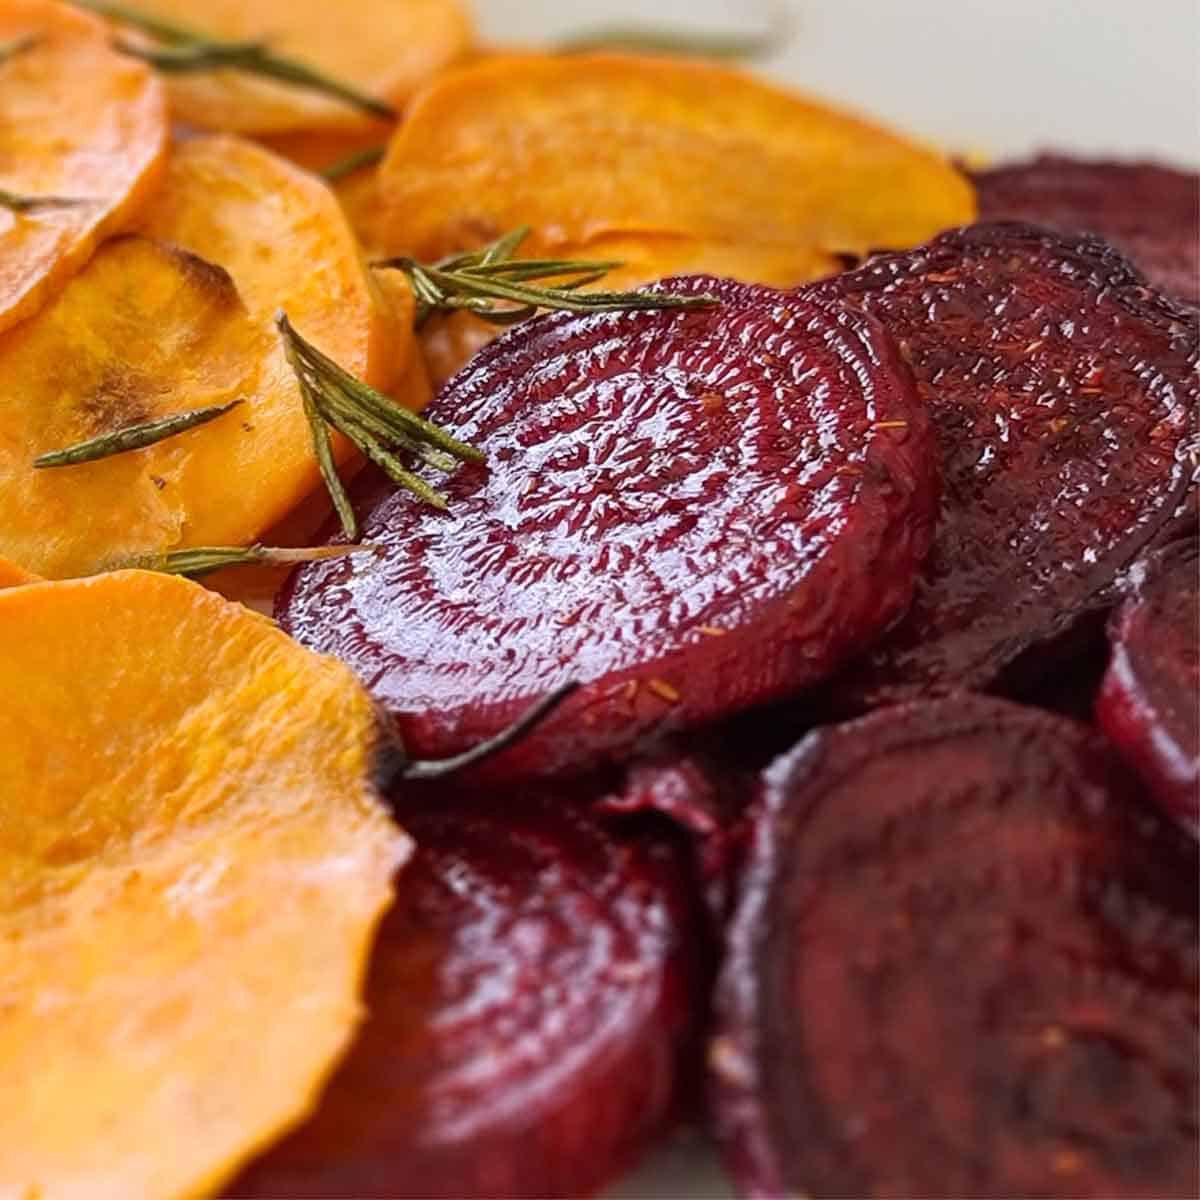 beets without foil